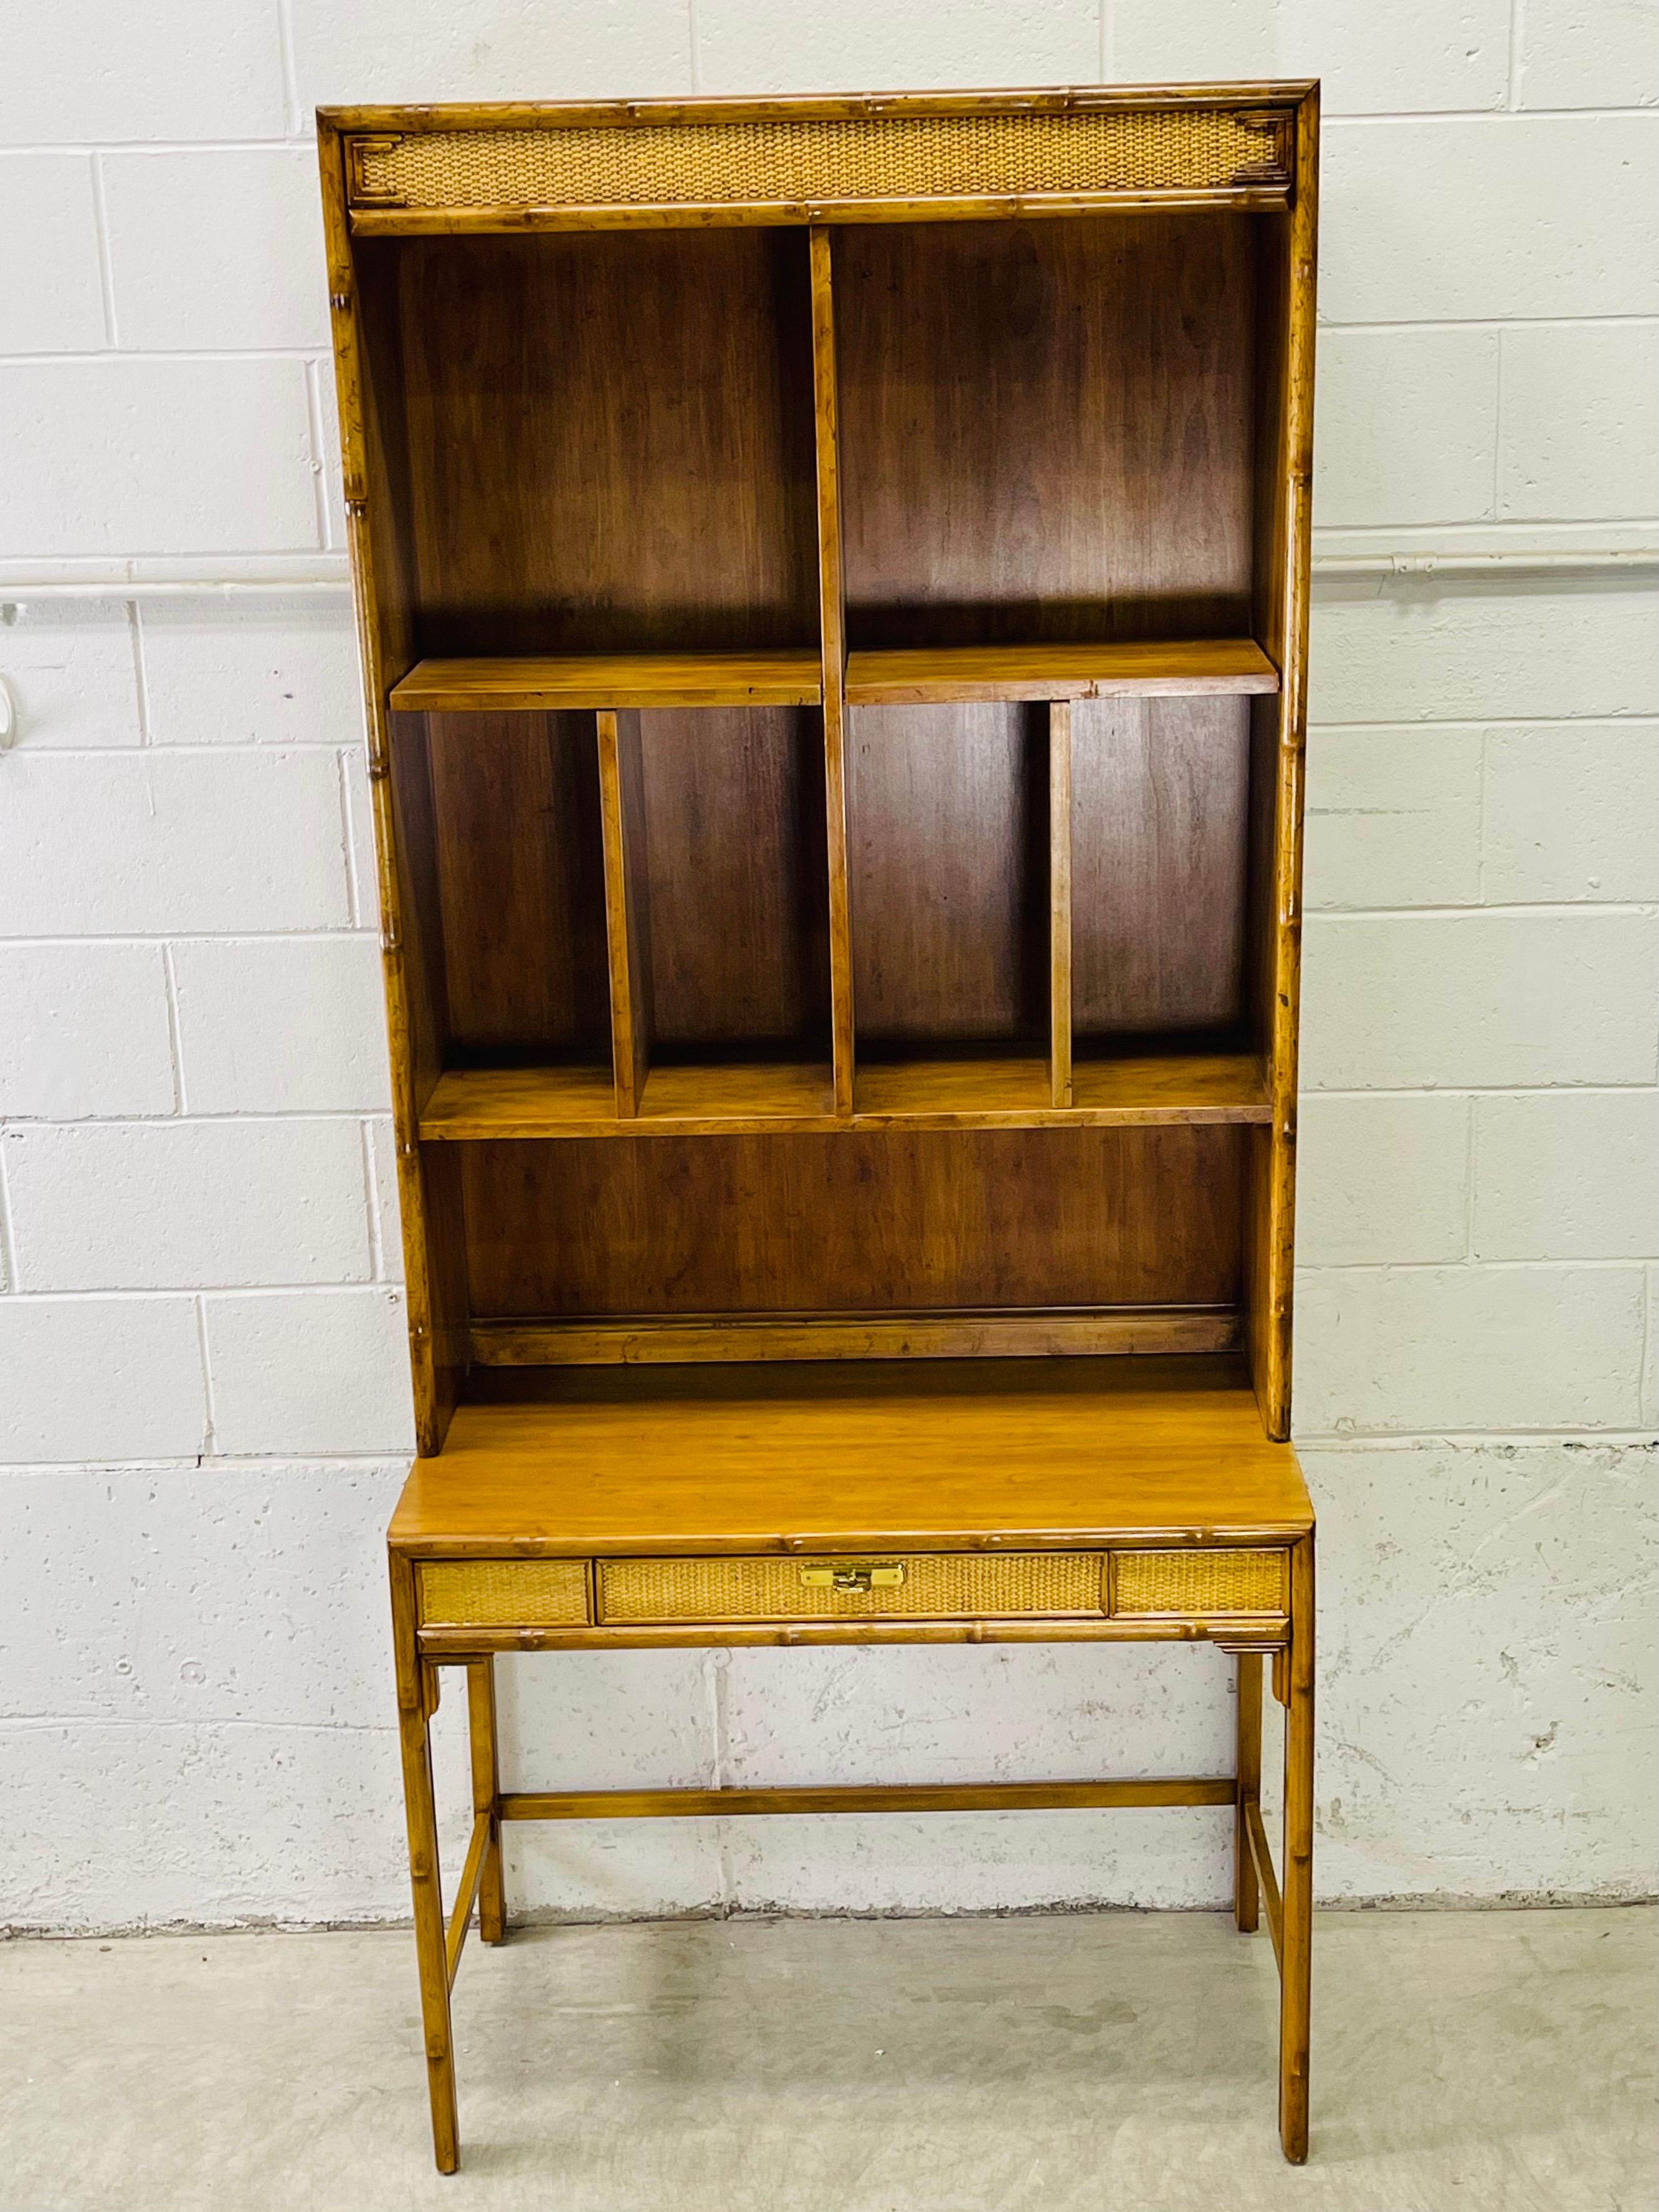 Vintage 1970s Drexel Furniture bamboo and cane accented tall two part secretary desk. The top part has shelving and the base has a writing area with a single drawer for storage. This desk is from the Captiva collection. The shelves are 10”deep.